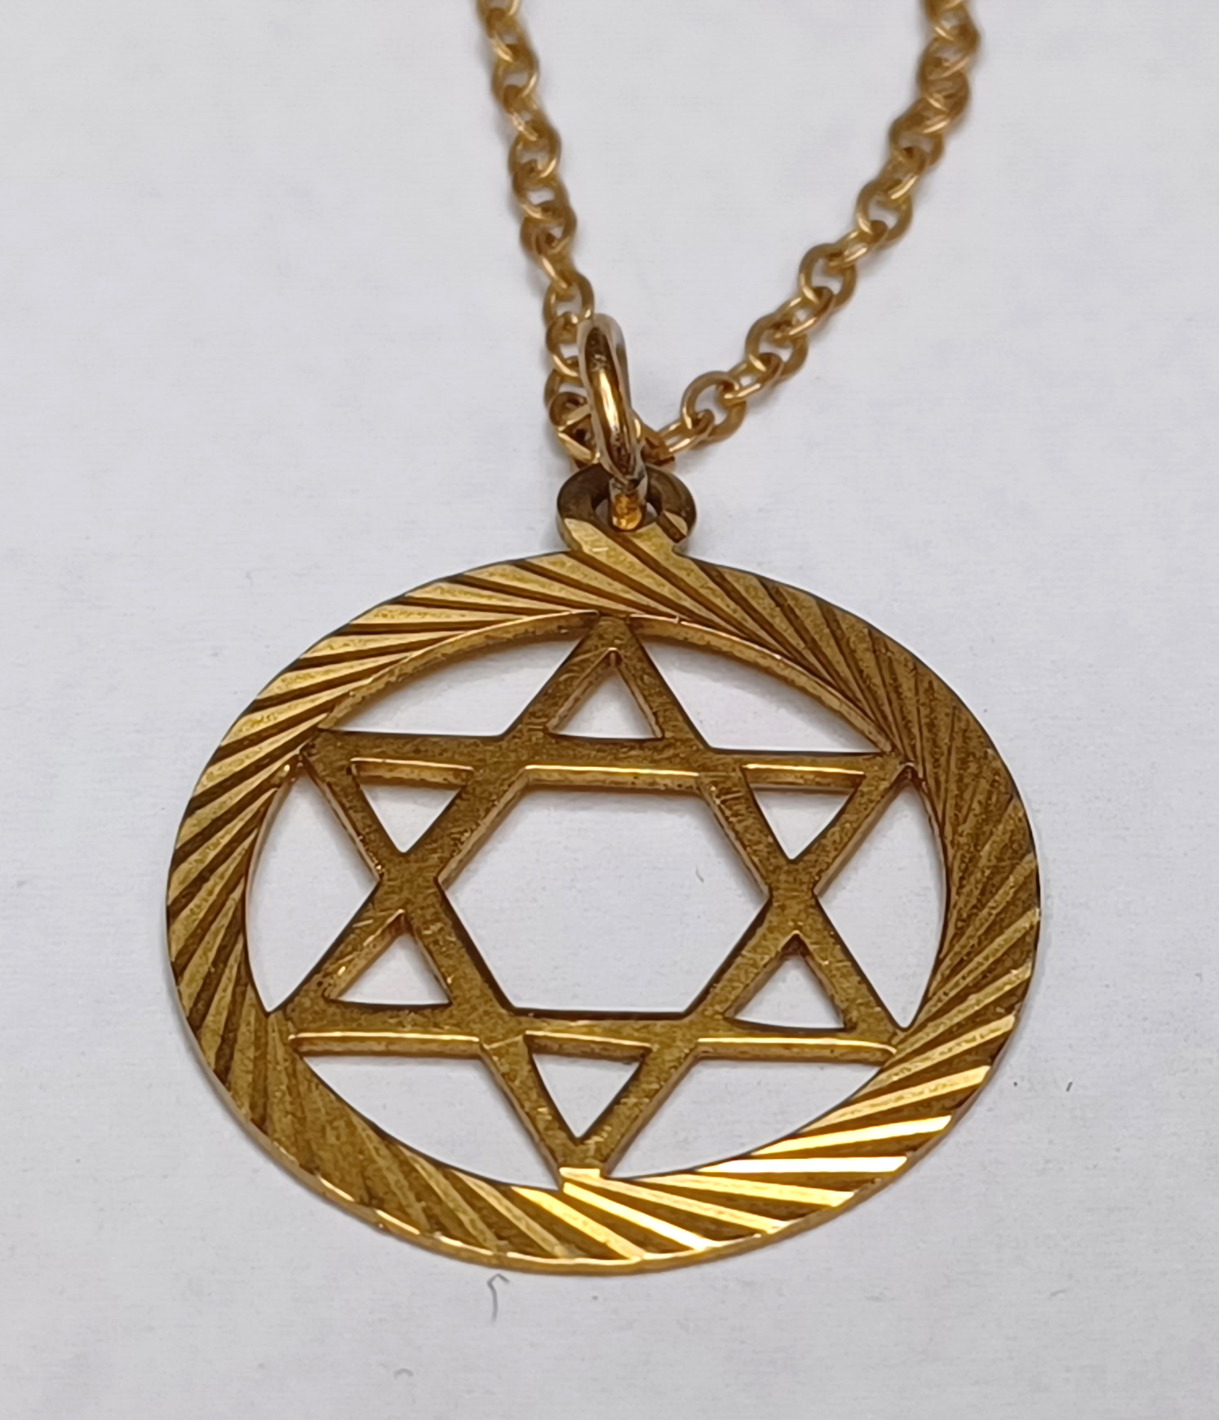 9CT GOLD STAR OF DAVID PENDANT AND 9CT GOLD CHAIN 16" LONG. 2.2g 